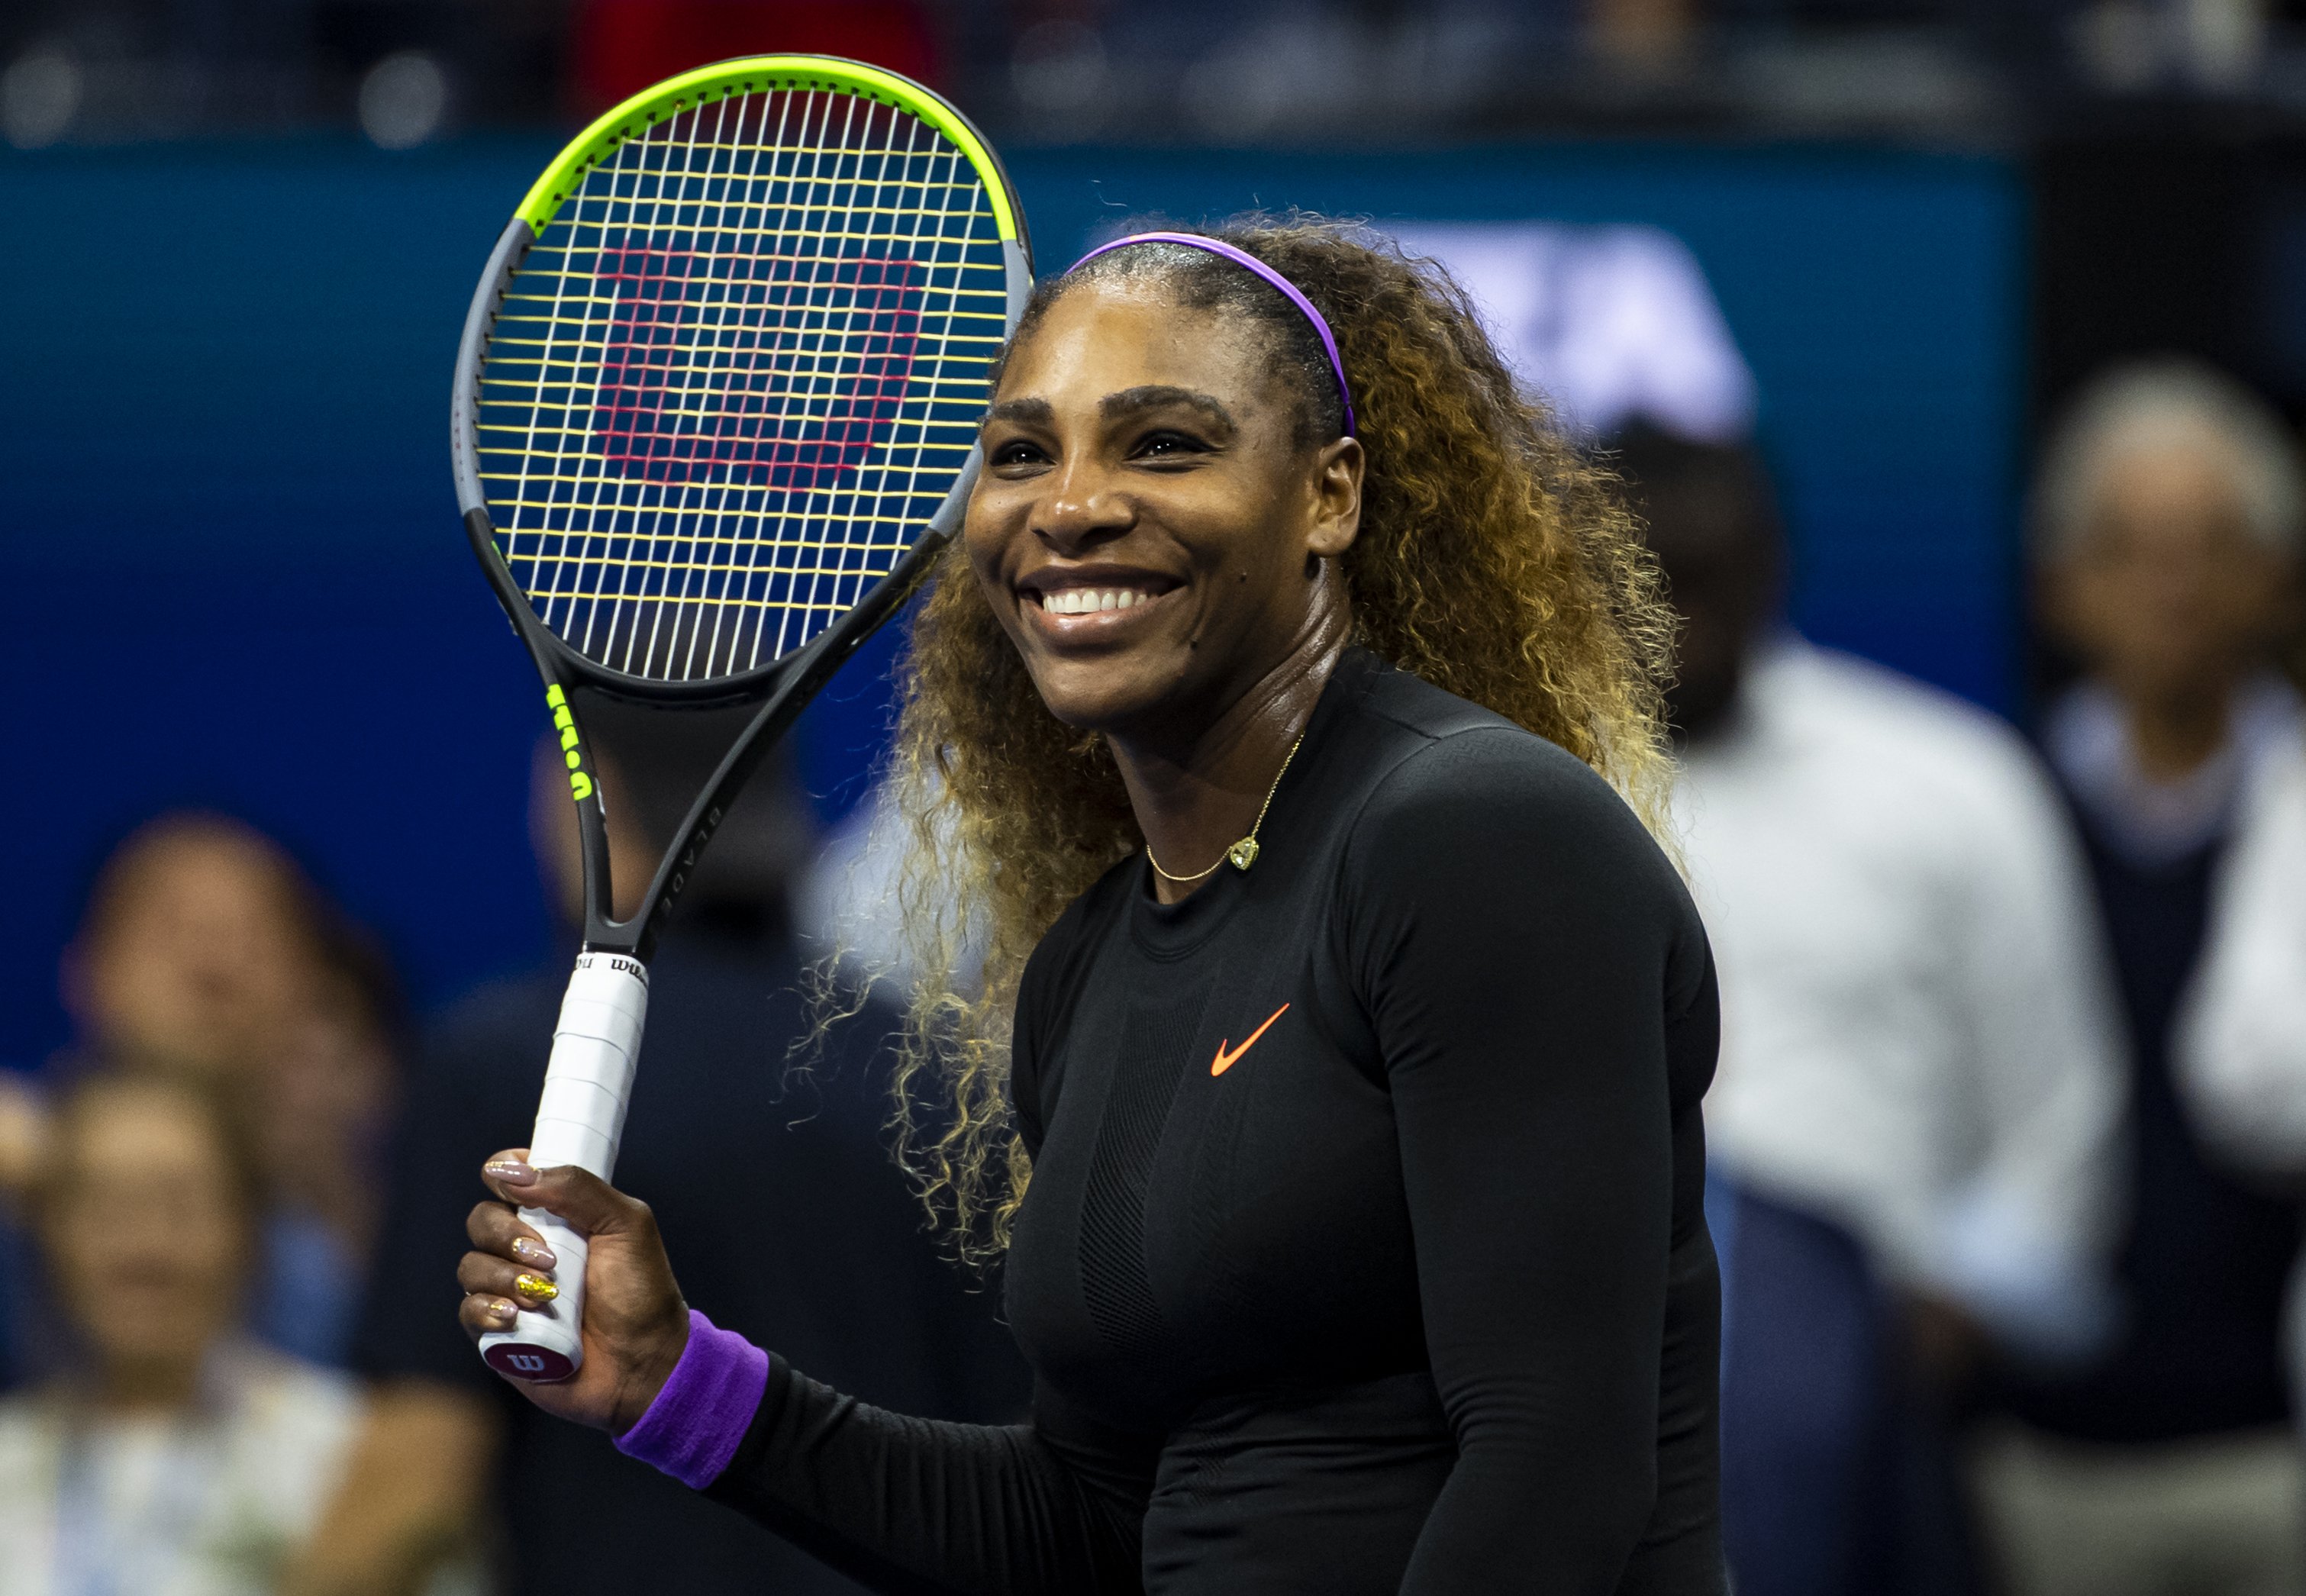 Serena Williams at the USTA Billie Jean King National Tennis Center on September 05, 2019| Photo: Getty Images